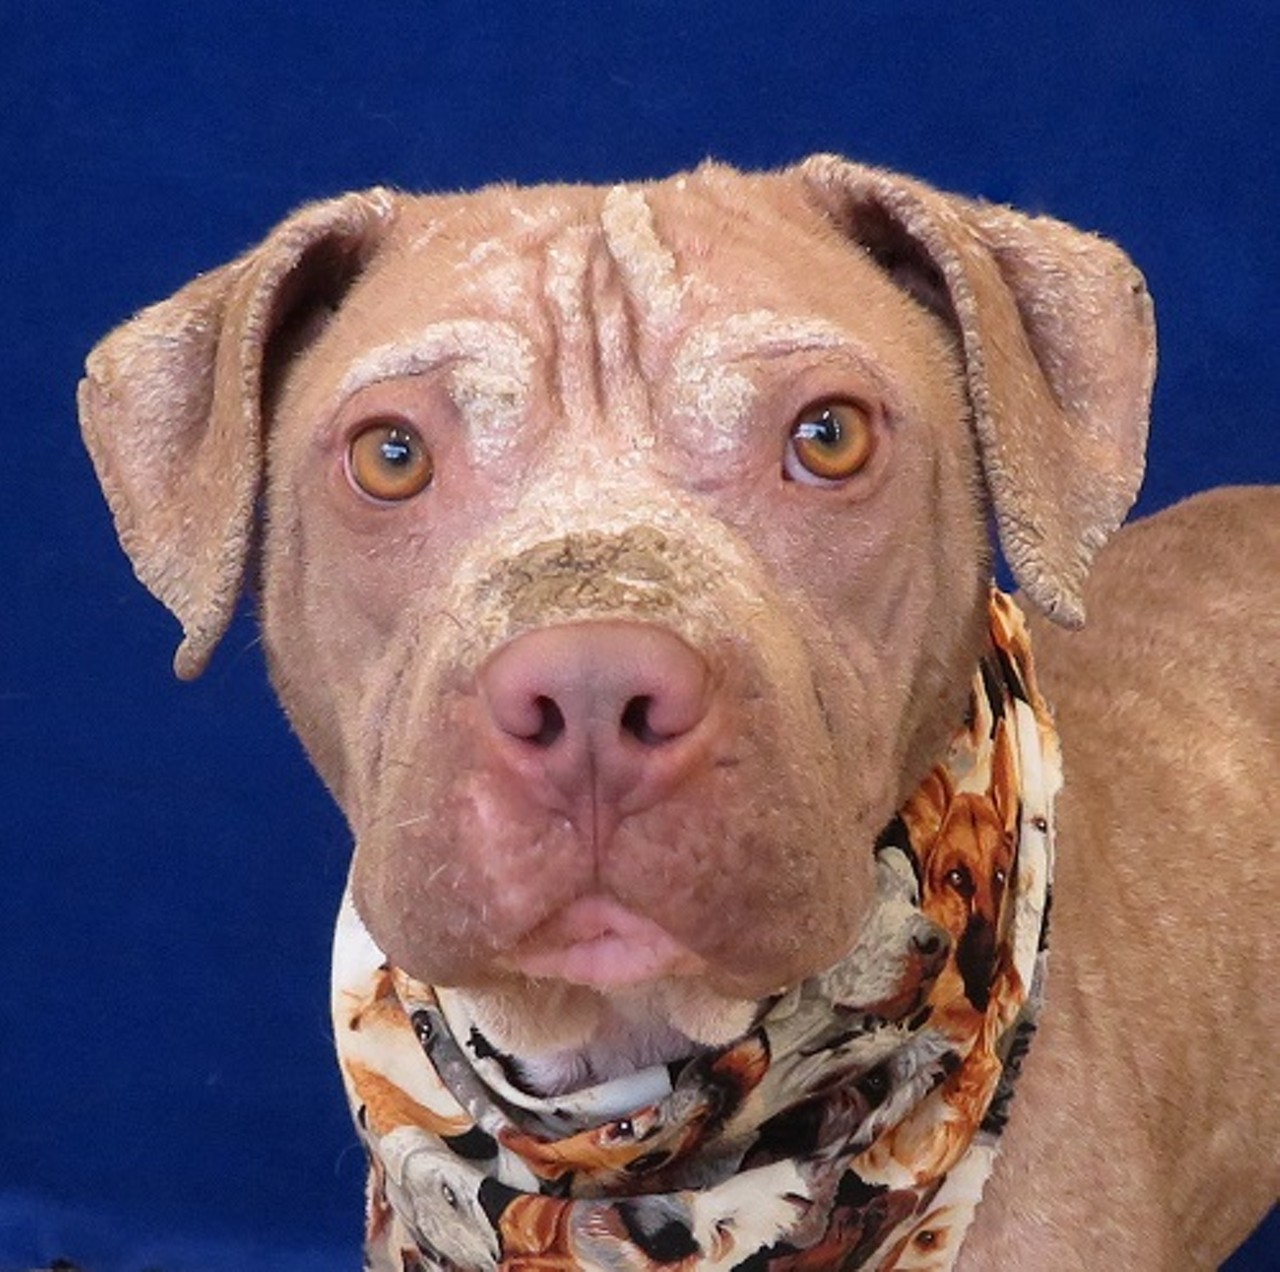 NAME: Biscuit
GENDER: Male
BREED: Pit Bull Terrier
AGE: 10 months
WEIGHT: 40 pounds
SPECIAL CONSIDERATIONS: Recovering from noncontagious skin ailment
REASON I CAME TO MHS: Homeless in Detroit
LOCATION: Mackey Center for Animal Care in Detroit
ID NUMBER: 865072